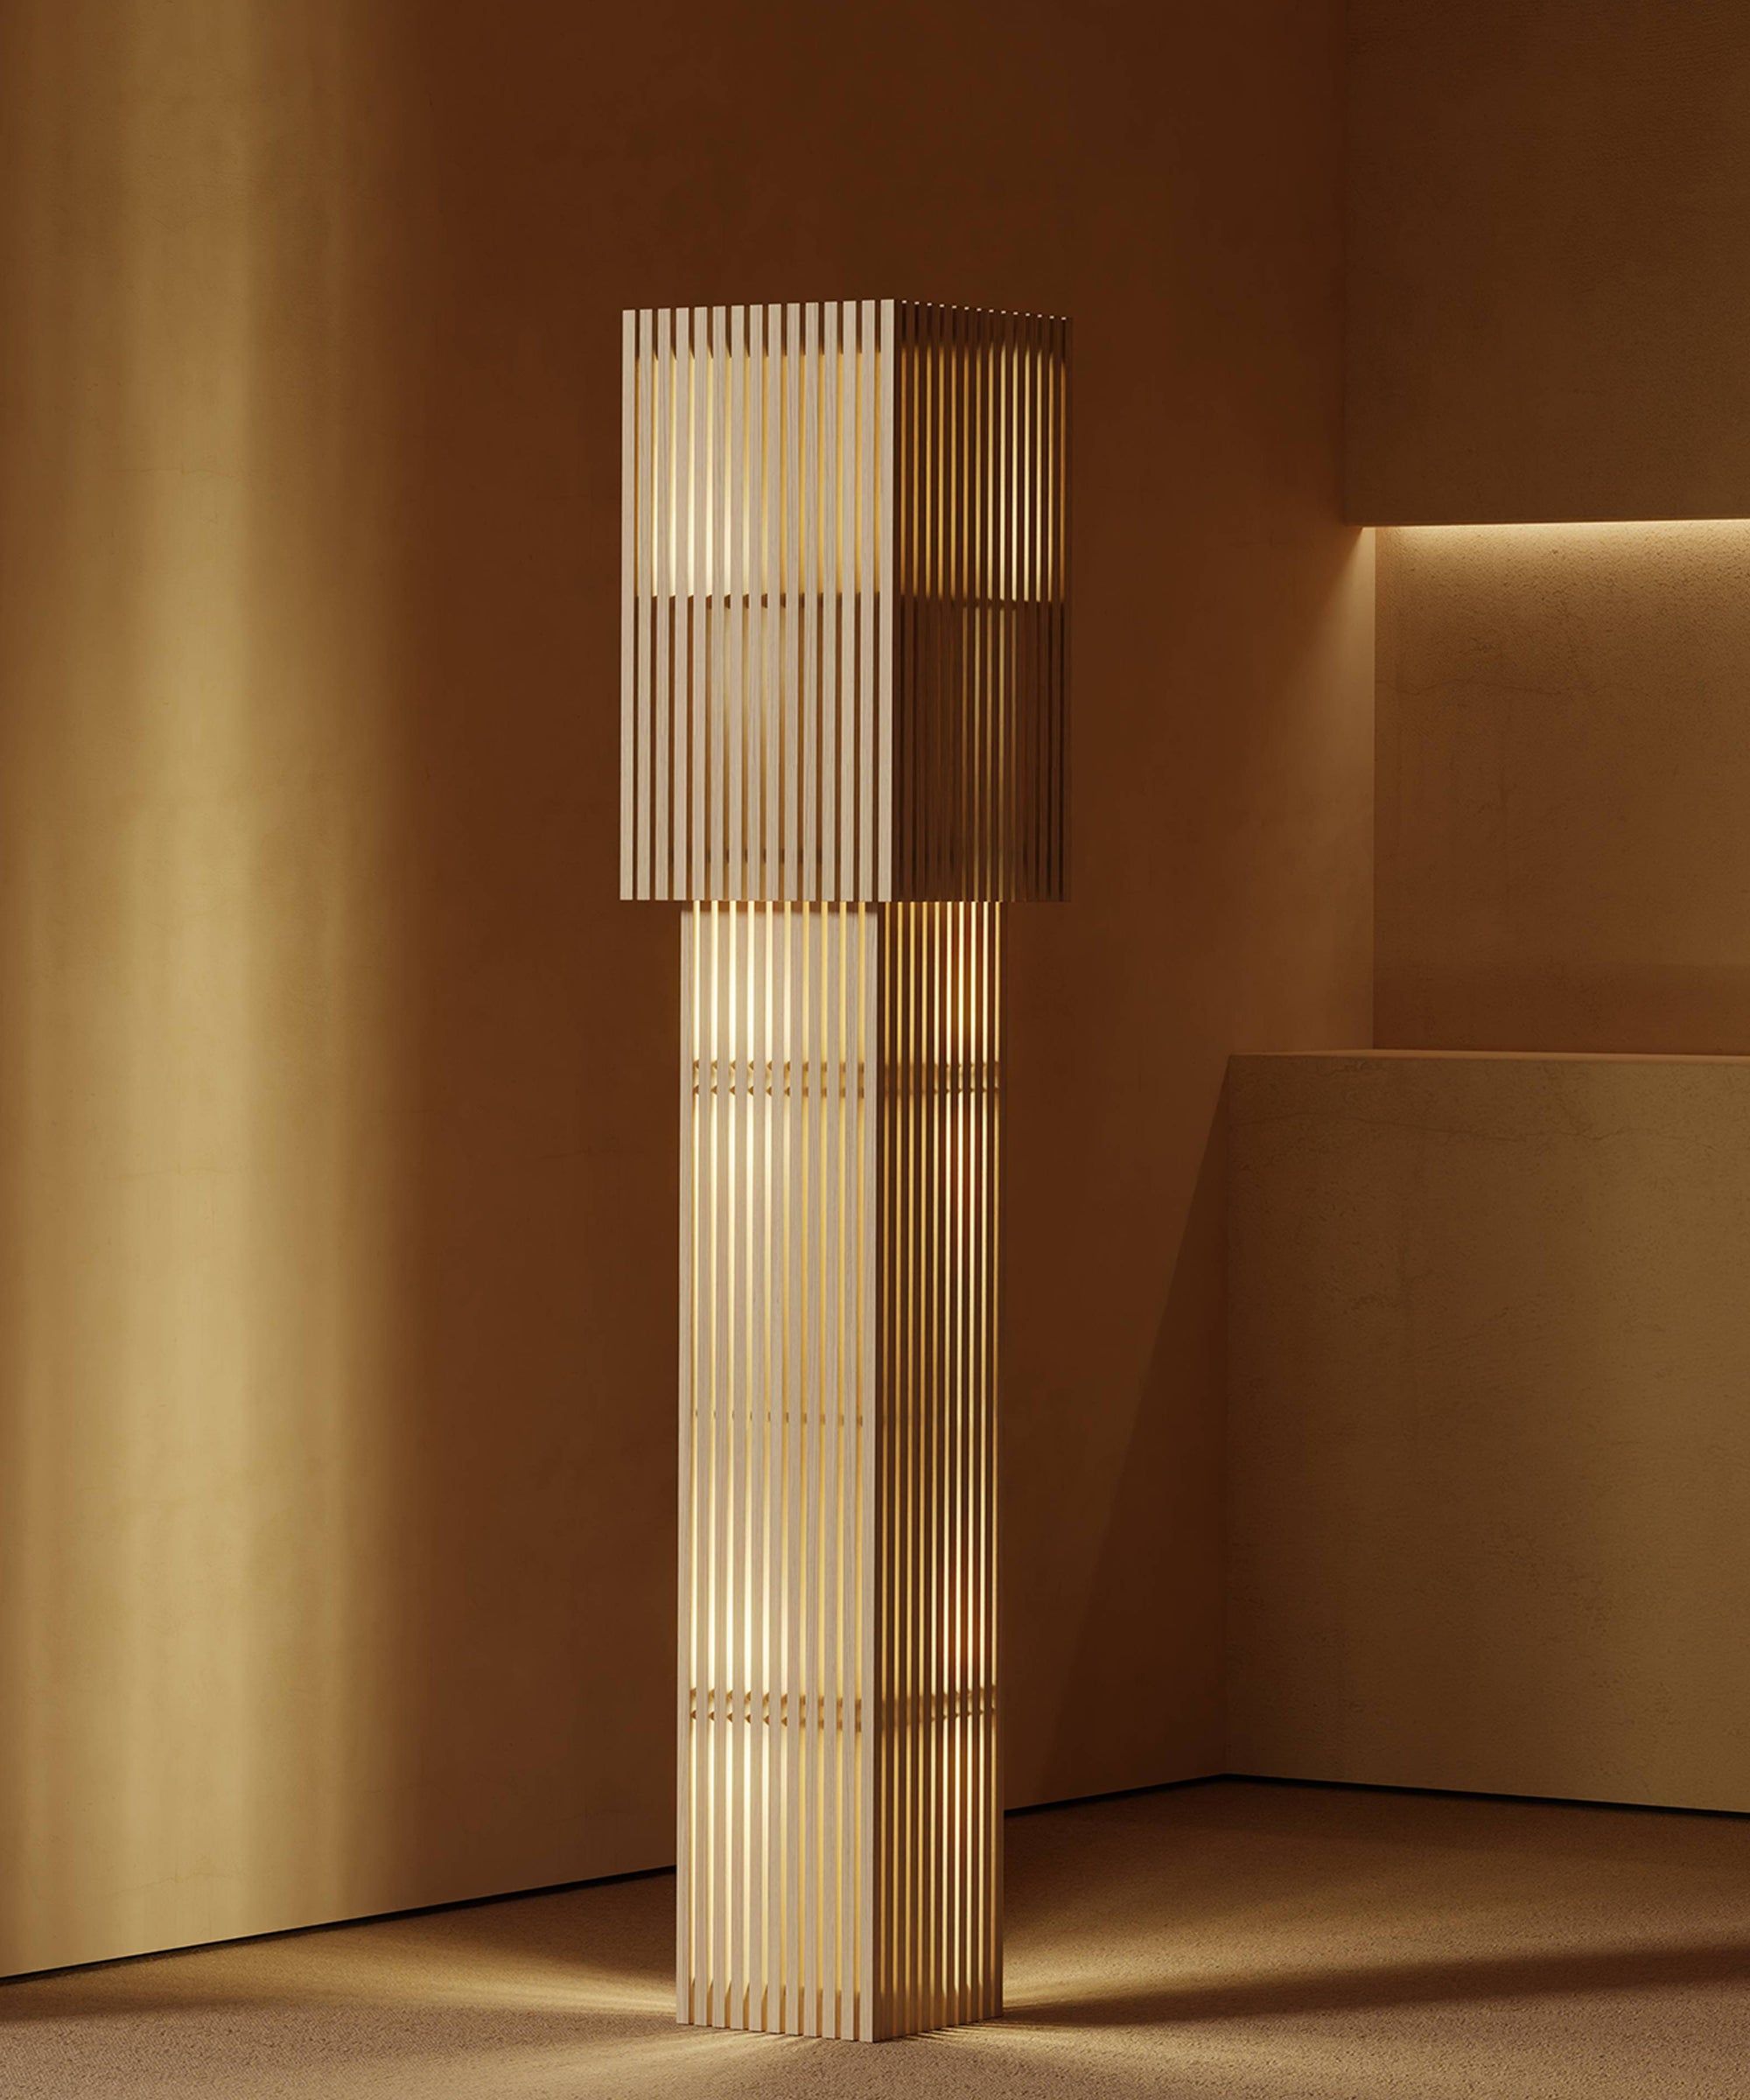 Design Floor Lamps Illuminate Your Space with Stylish and Functional Floor Lighting Options